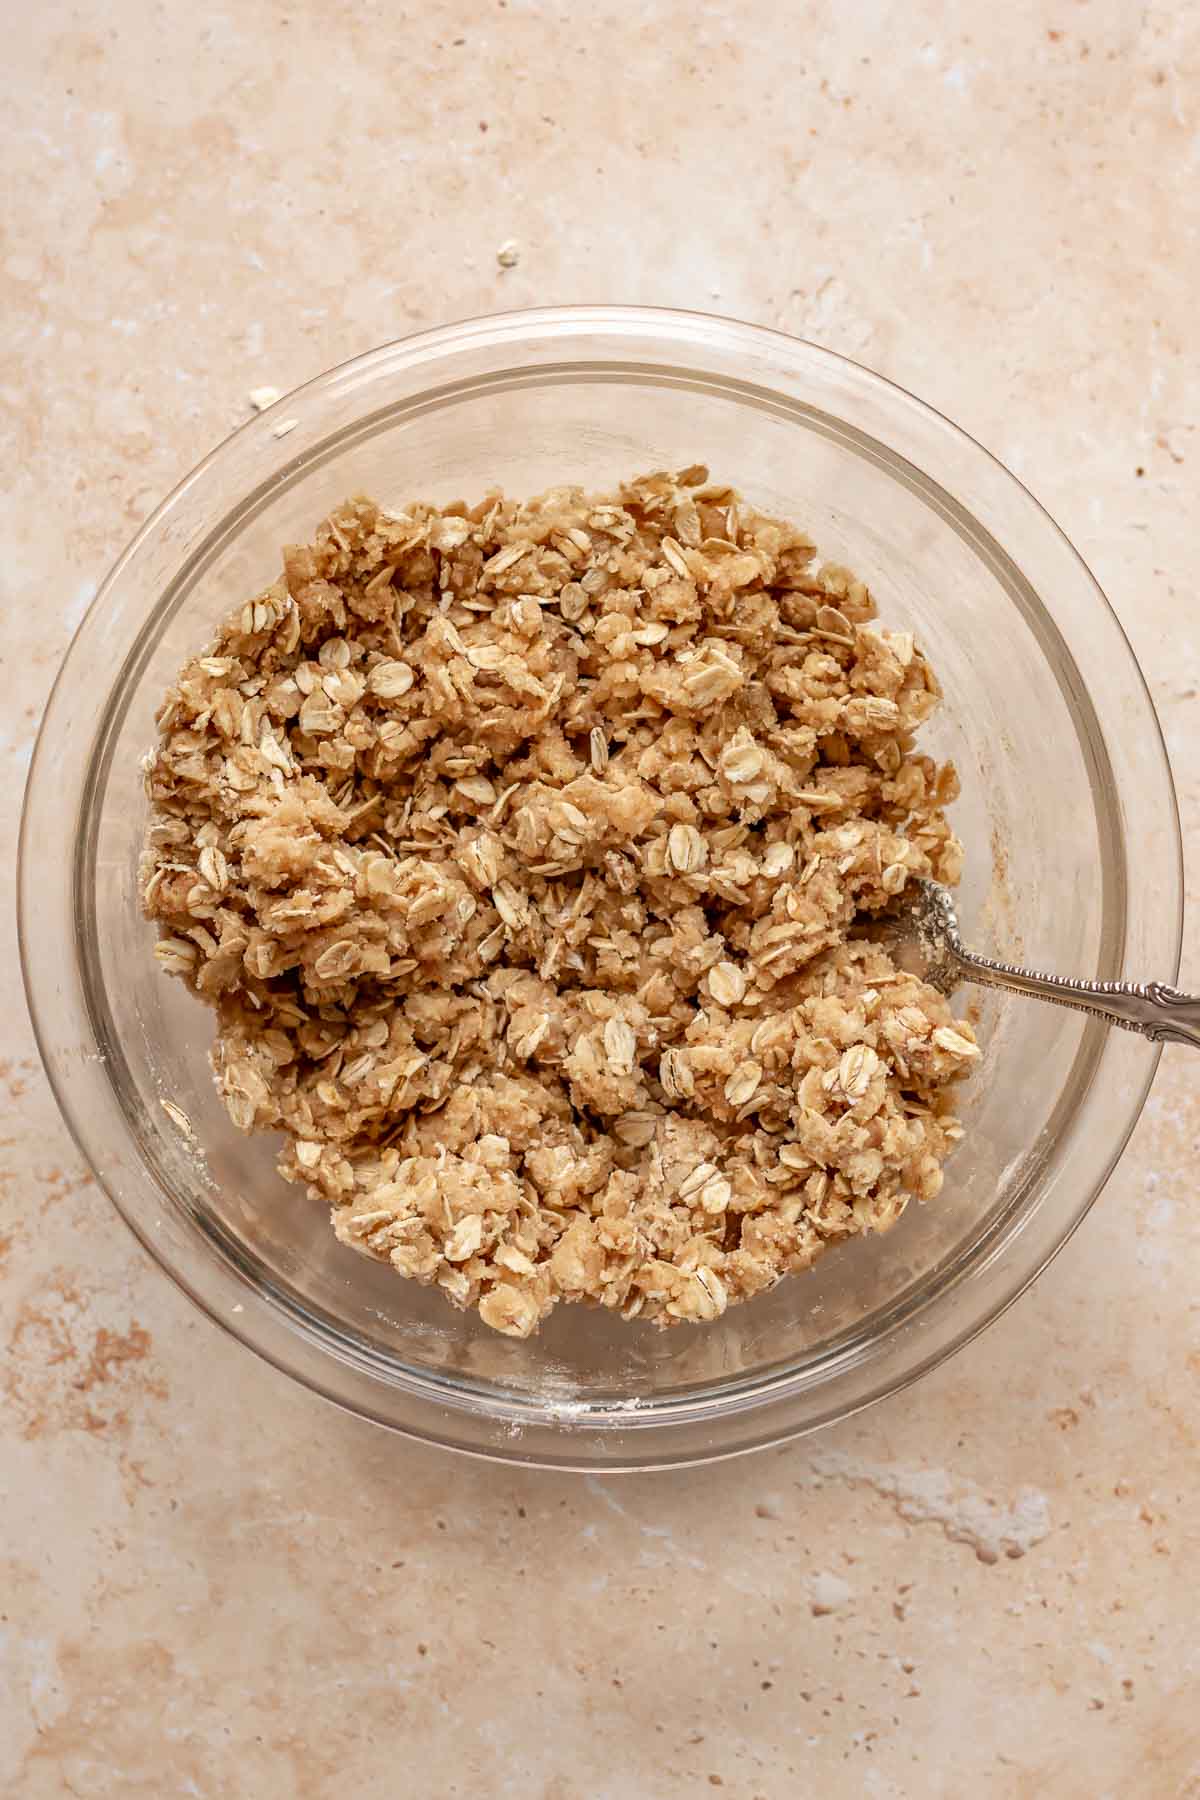 Streusel topping in a bowl with a fork.